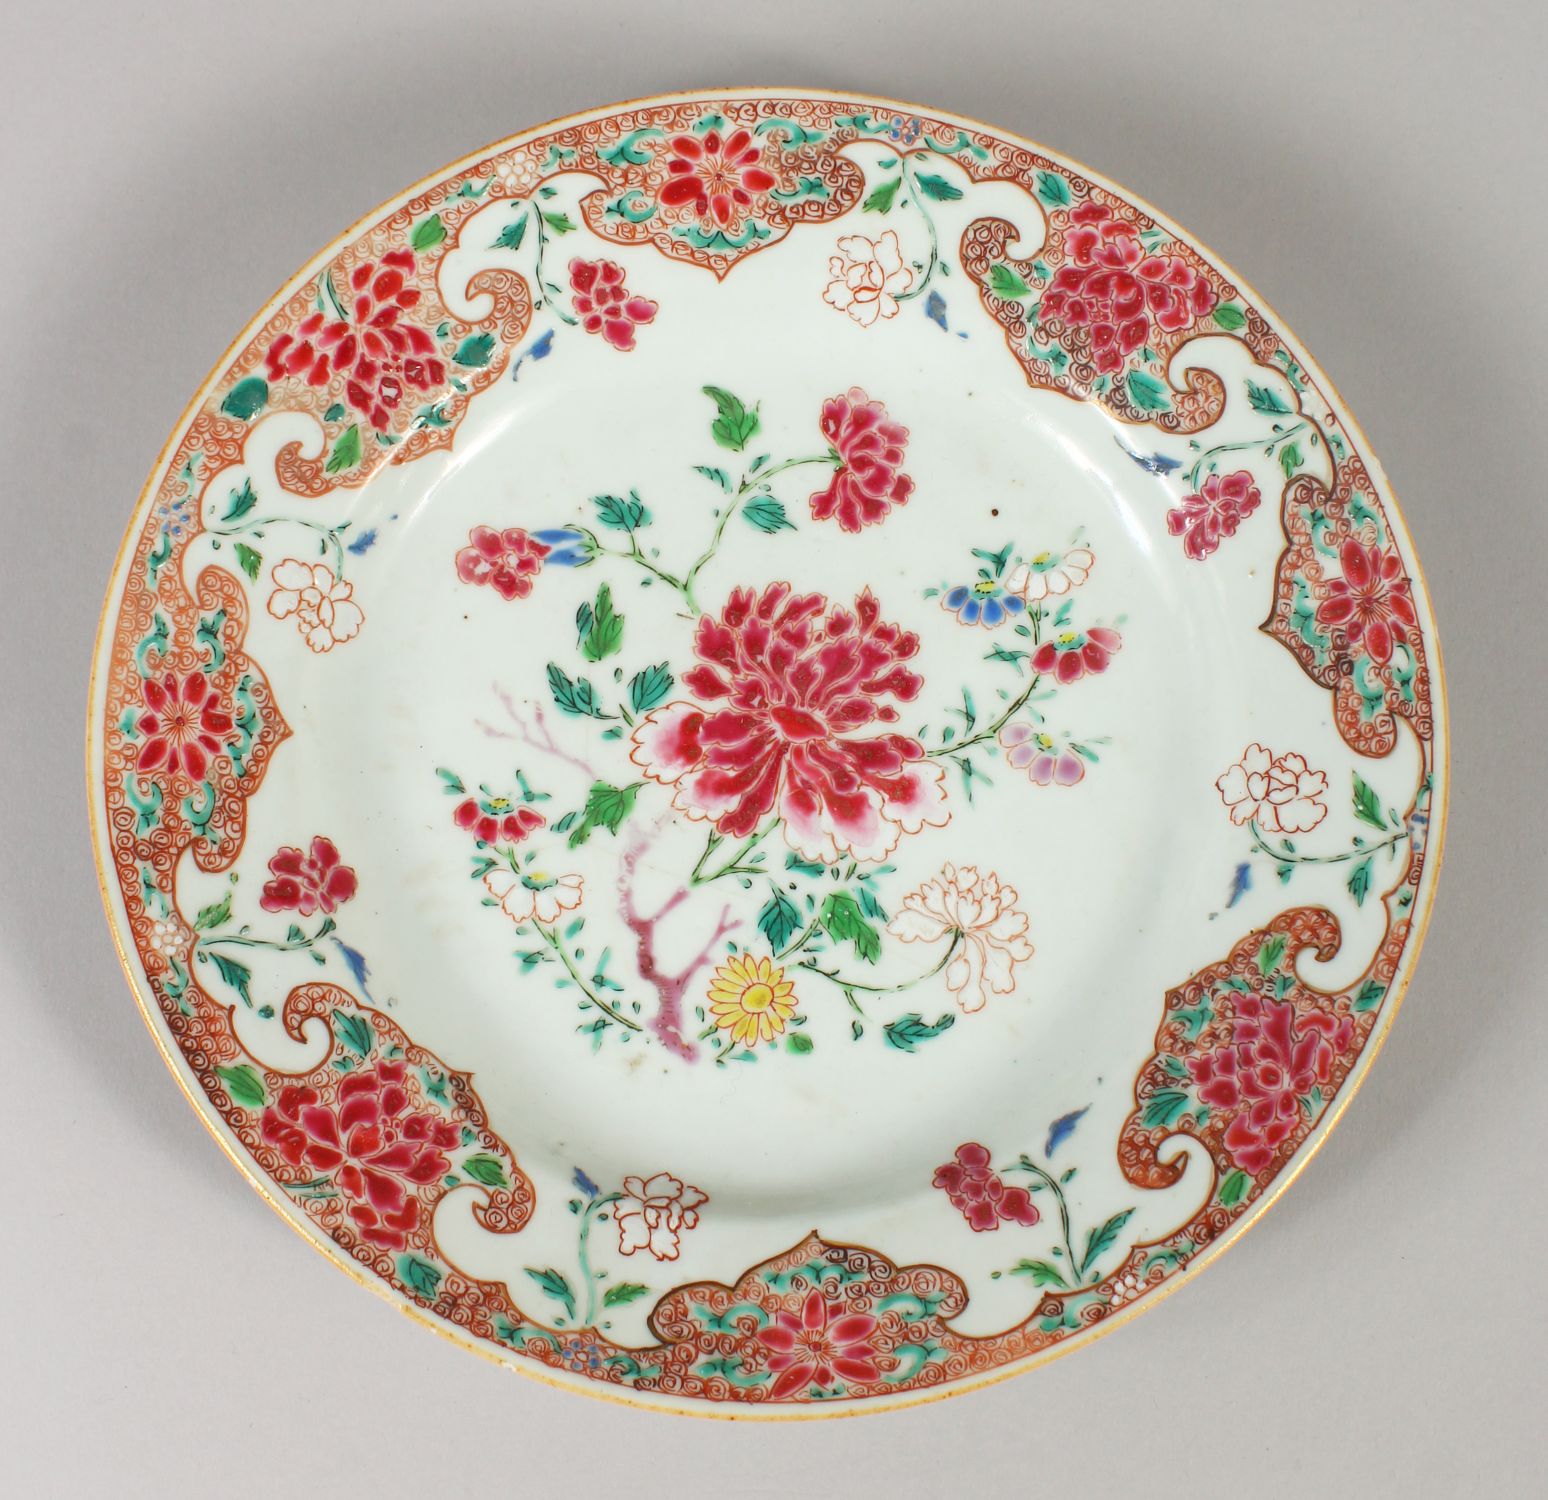 AN 18TH CENTURY CHINESE FAMILLE ROSE PORCELAIN PLATE, painted to its centre with peony and other